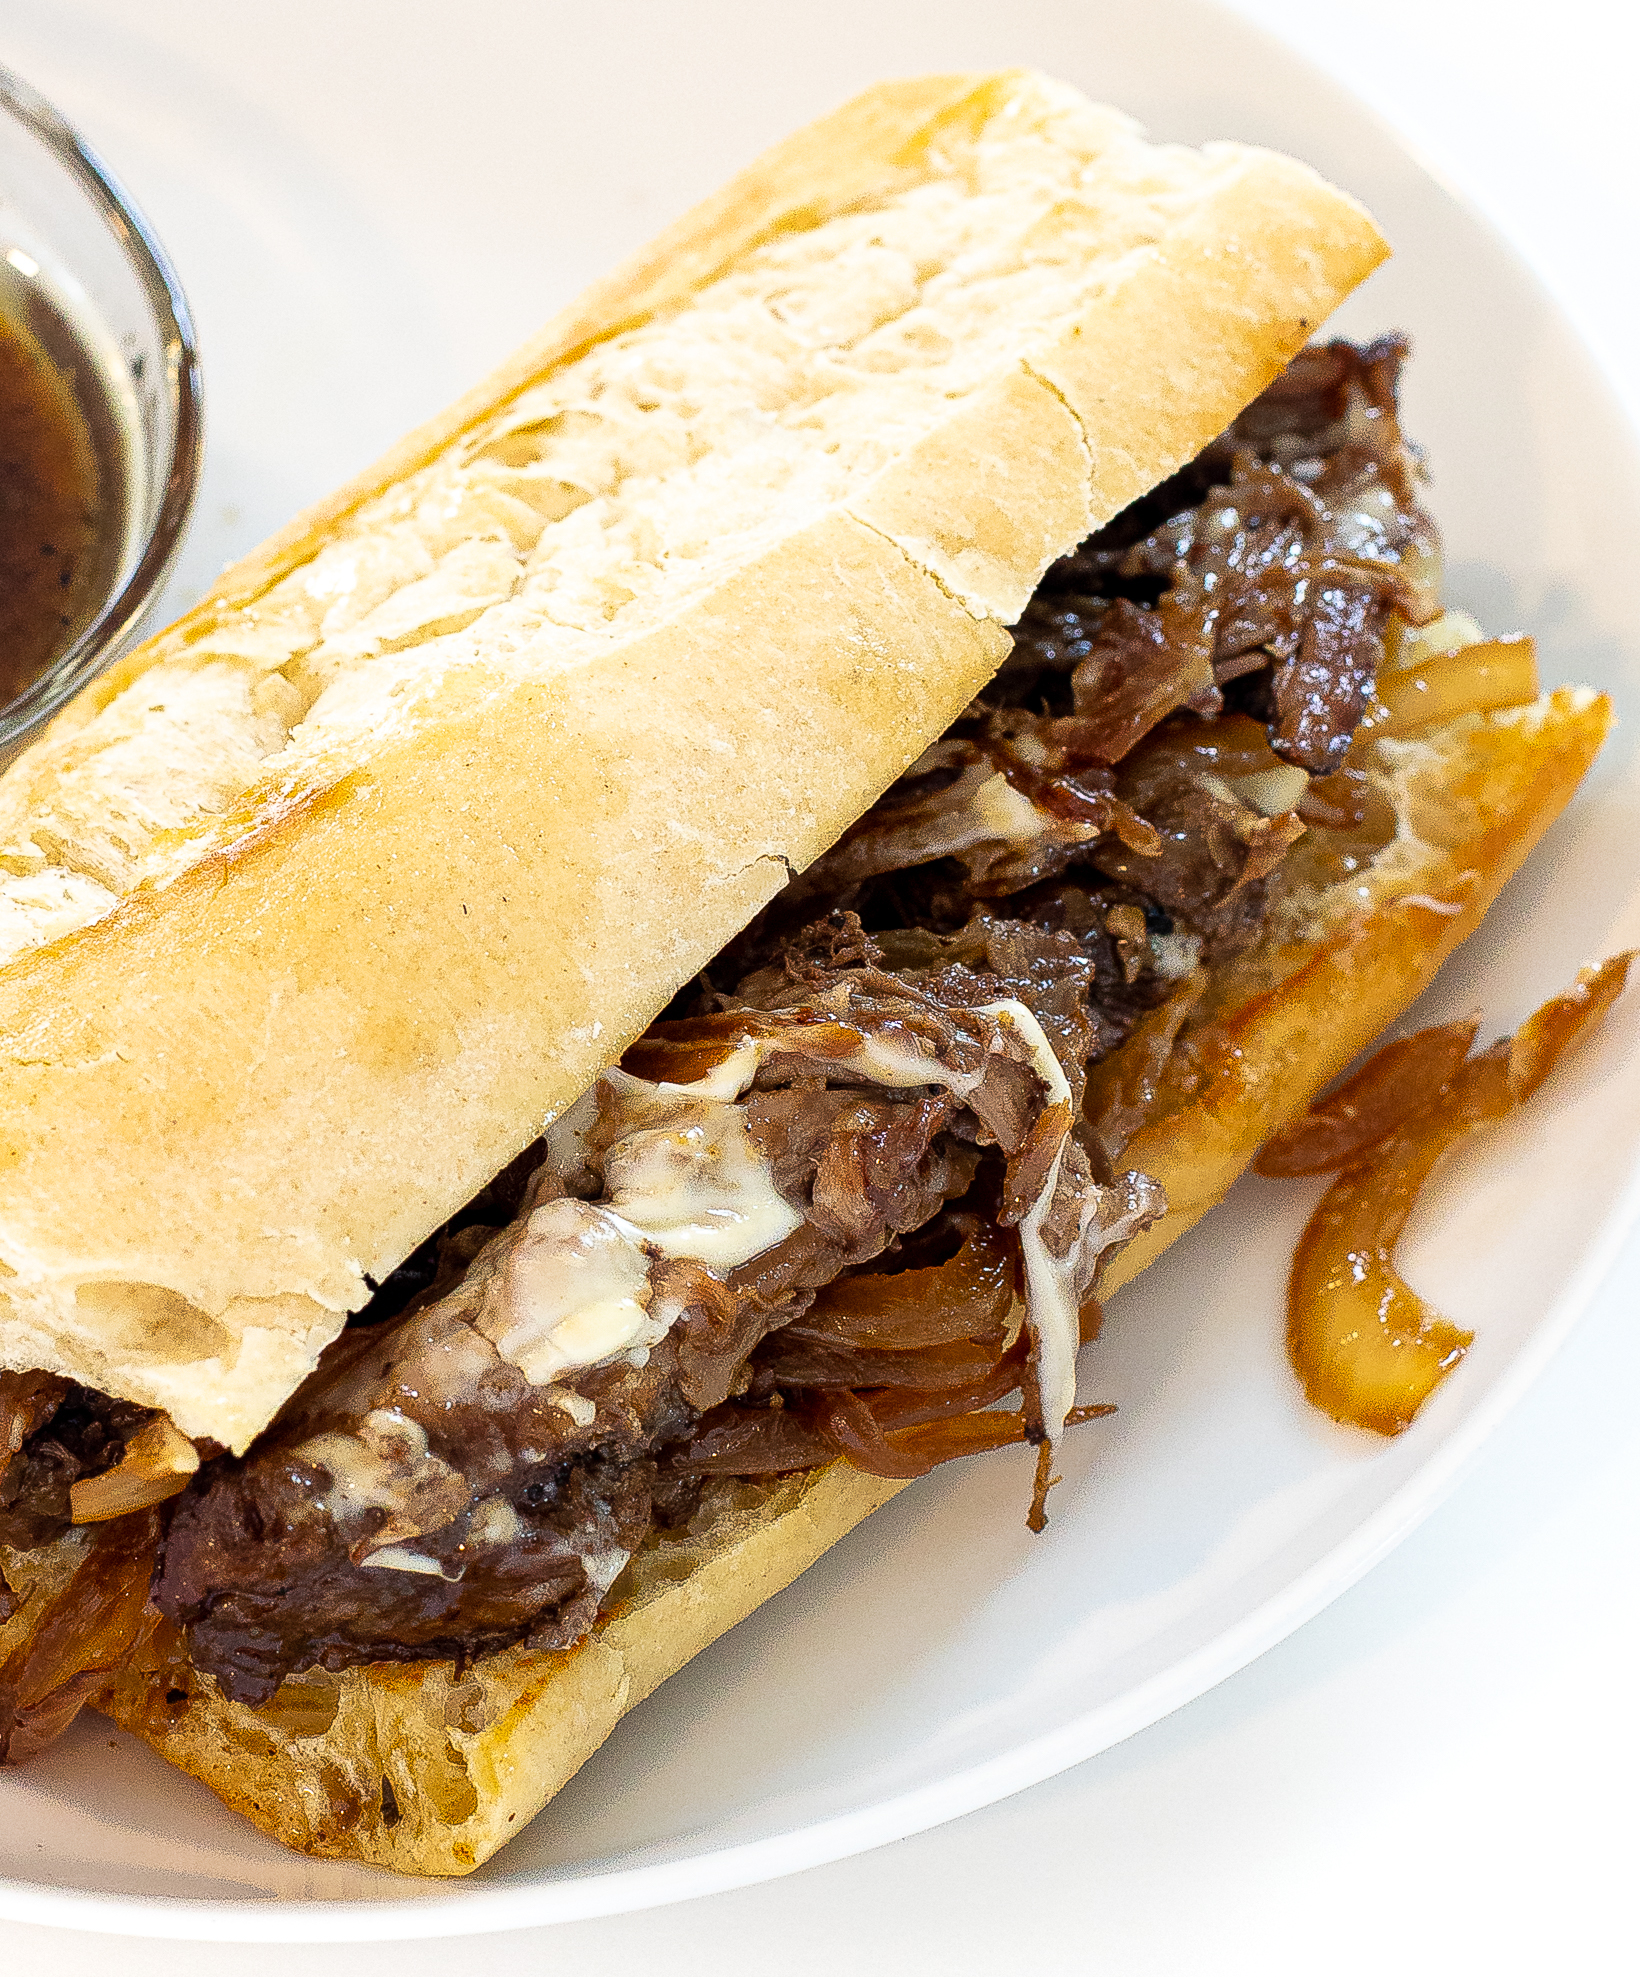 https://chefsavvy.com/wp-content/uploads/french-dip-sandwiches-on-plate.jpg